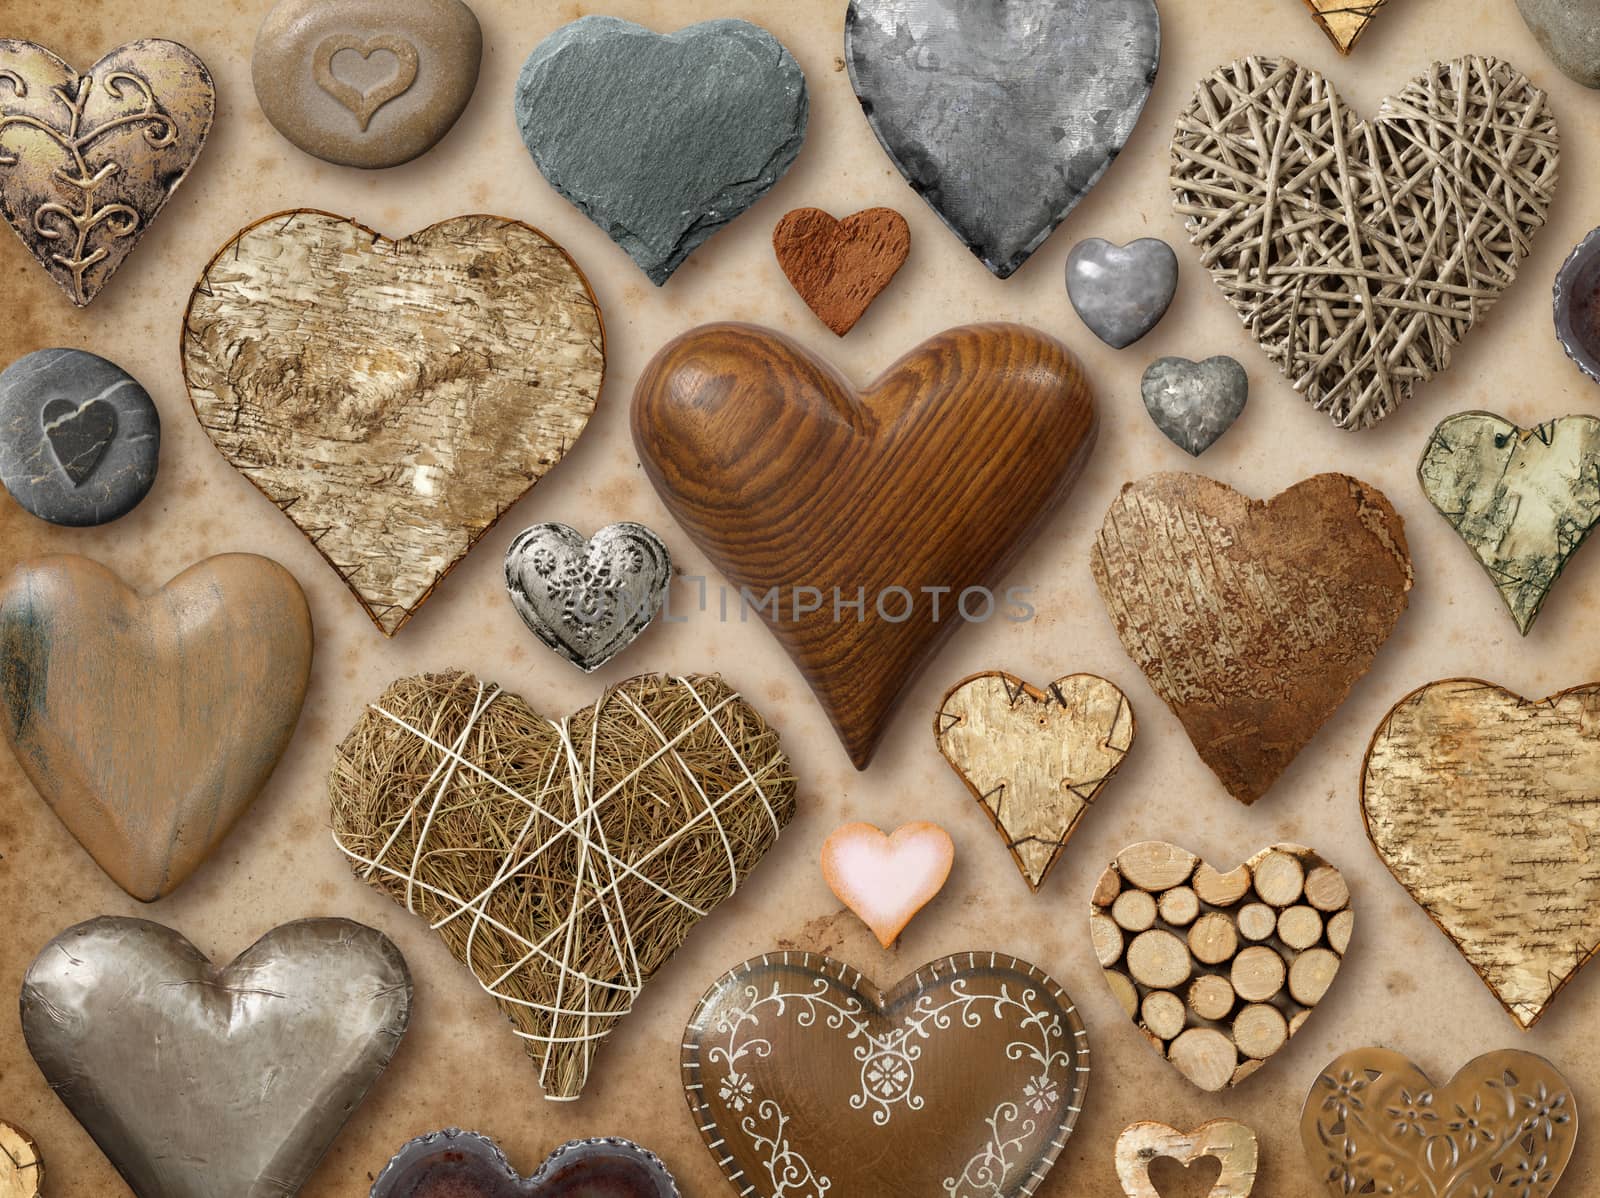 Background of heart-shaped things made of stone, metal and wood.
